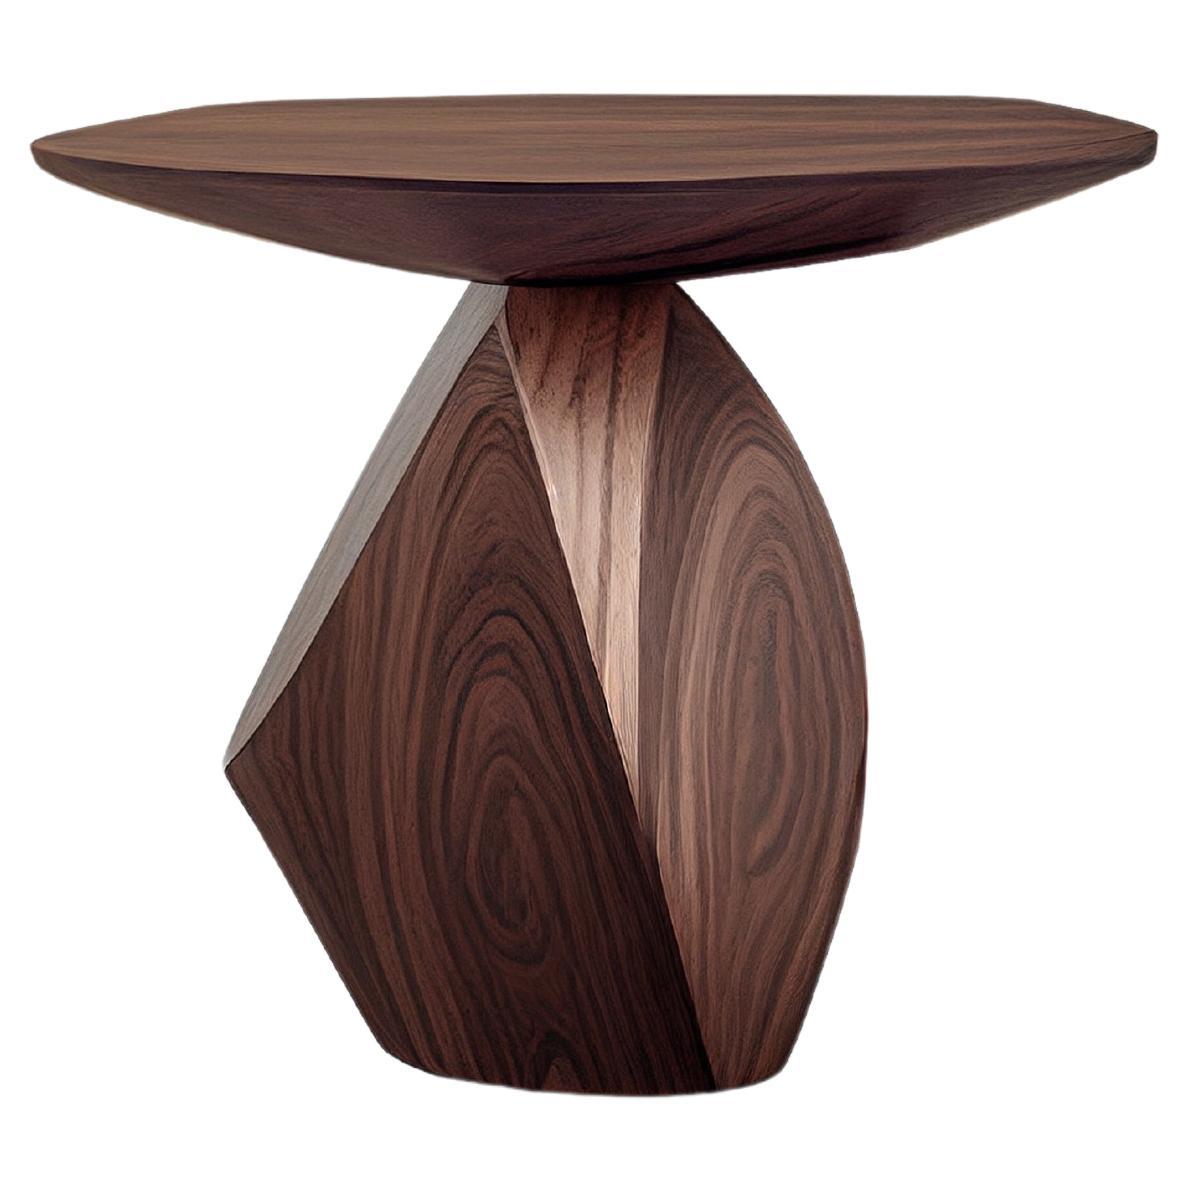 Artful Design Solace 3: Solid Walnut Auxiliary Table with Unique Wood Grain